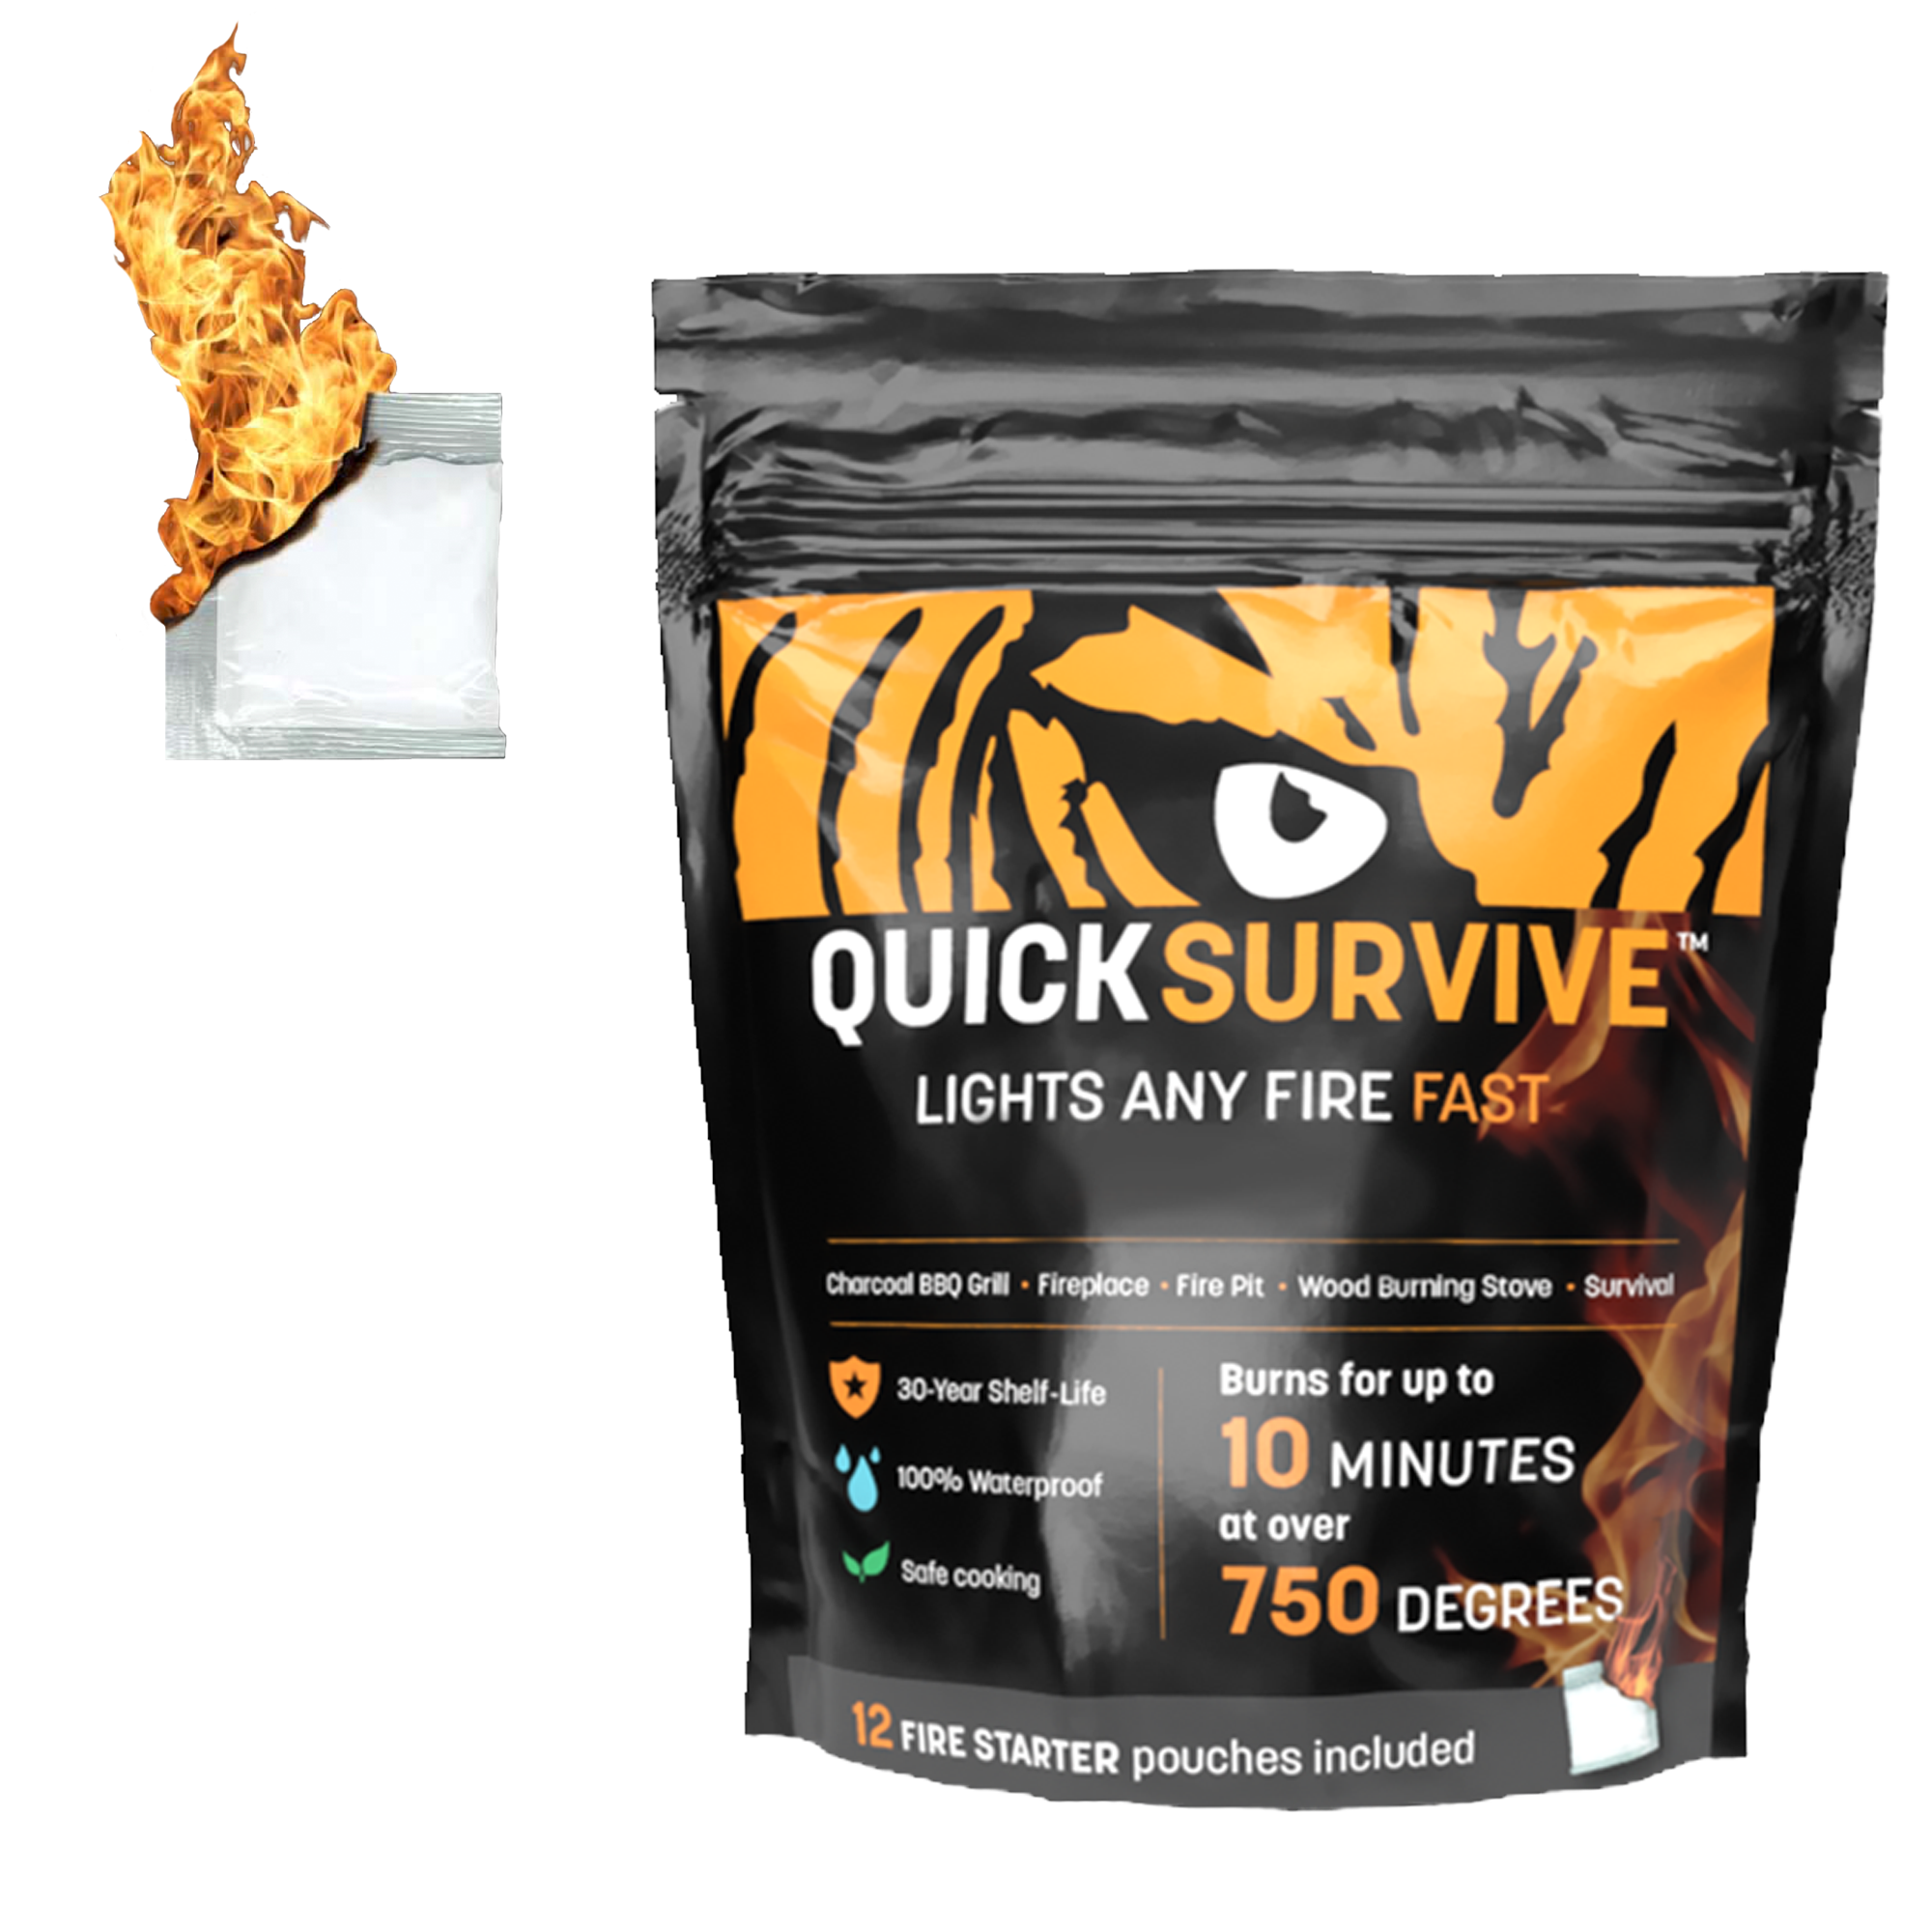 QuickSurvive The Best Fire Starters For Camping and Outdoors - Waterproof fire starters - formerly quick fire starters. Campfire ring with QuickSurvive Fire Starter 12 Pack.